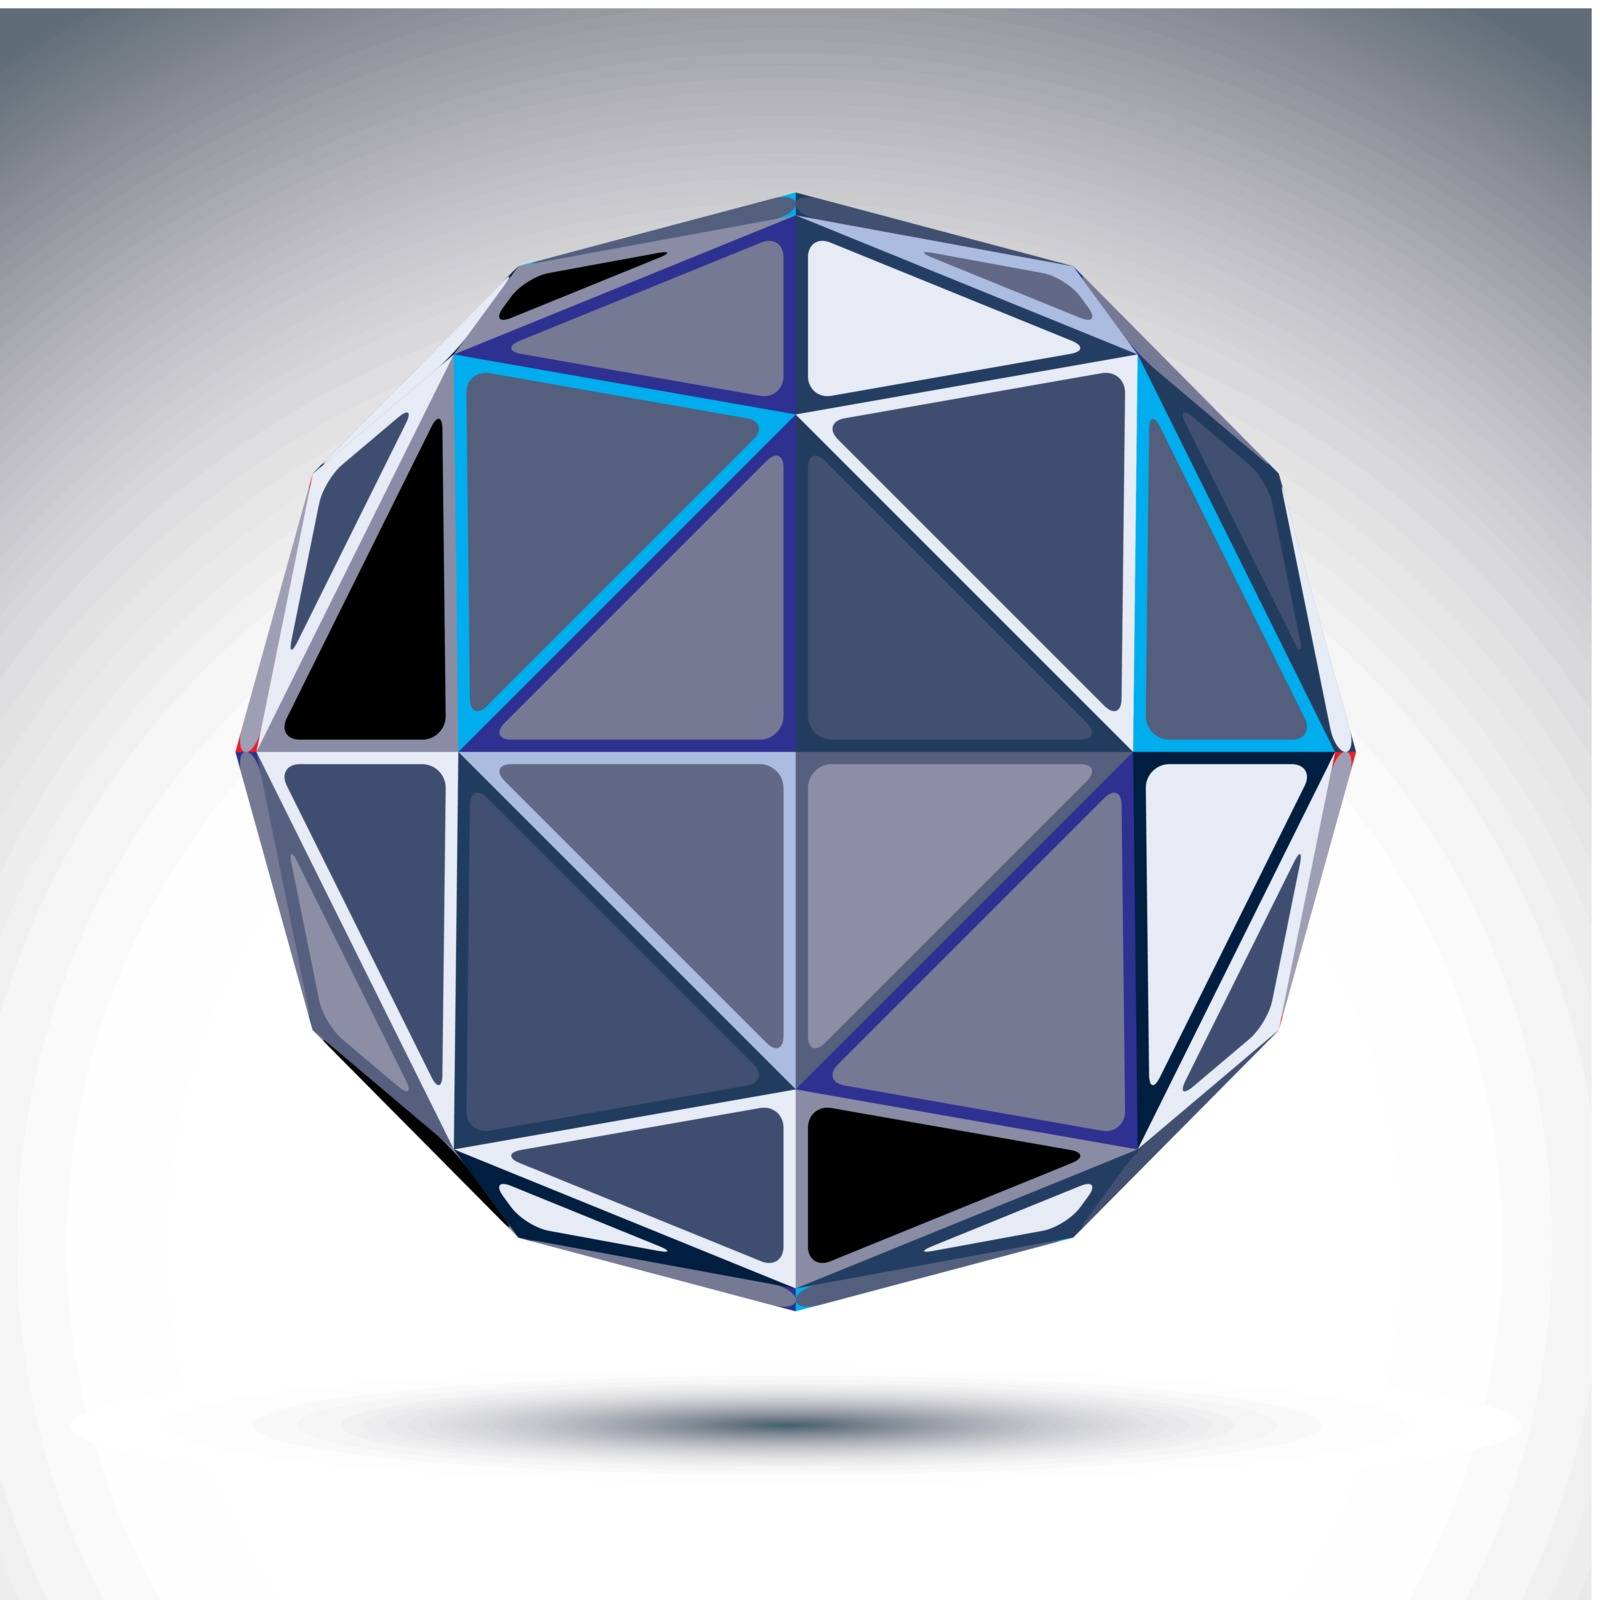 Complicated gray urban spherical object, 3d fractal mirror ball constructed from rectangular triangles with outline, geometric illustration with a kaleidoscope visual effect. 